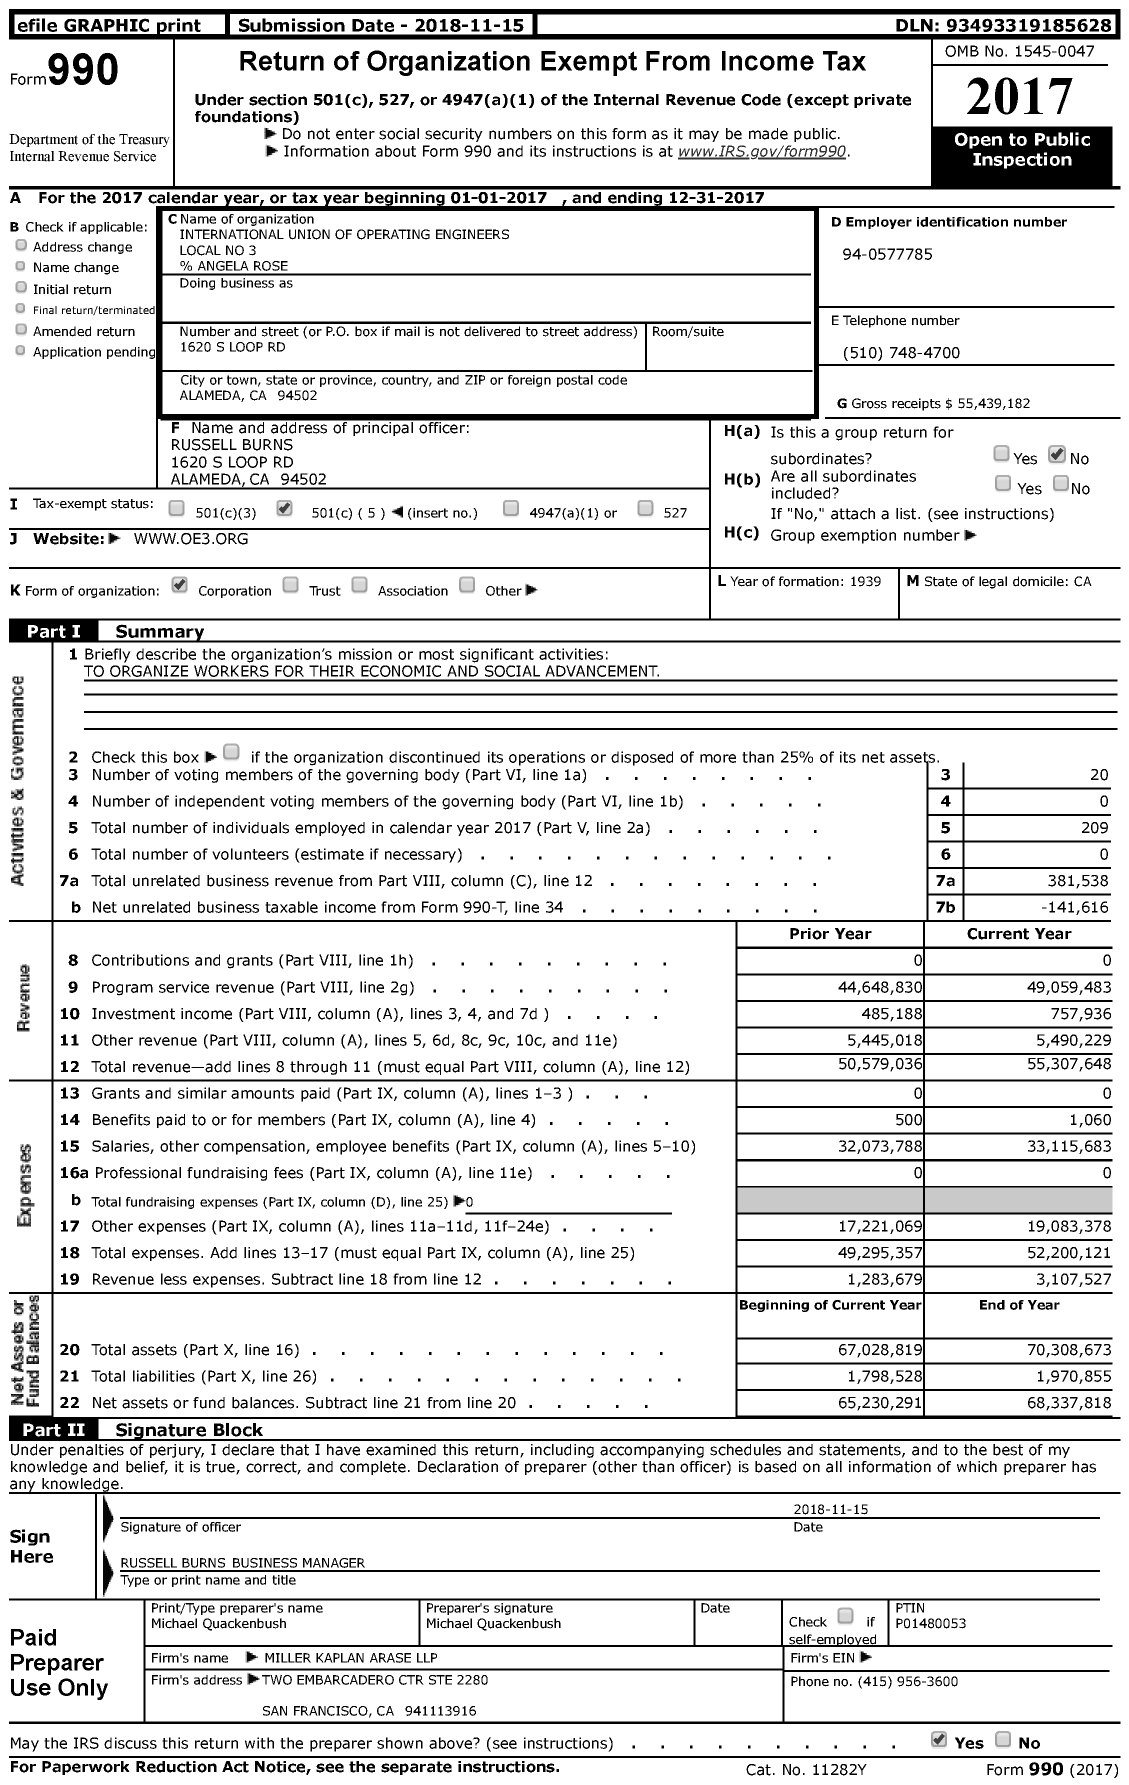 Image of first page of 2017 Form 990 for Operating Engineers Local 3 (OE3)